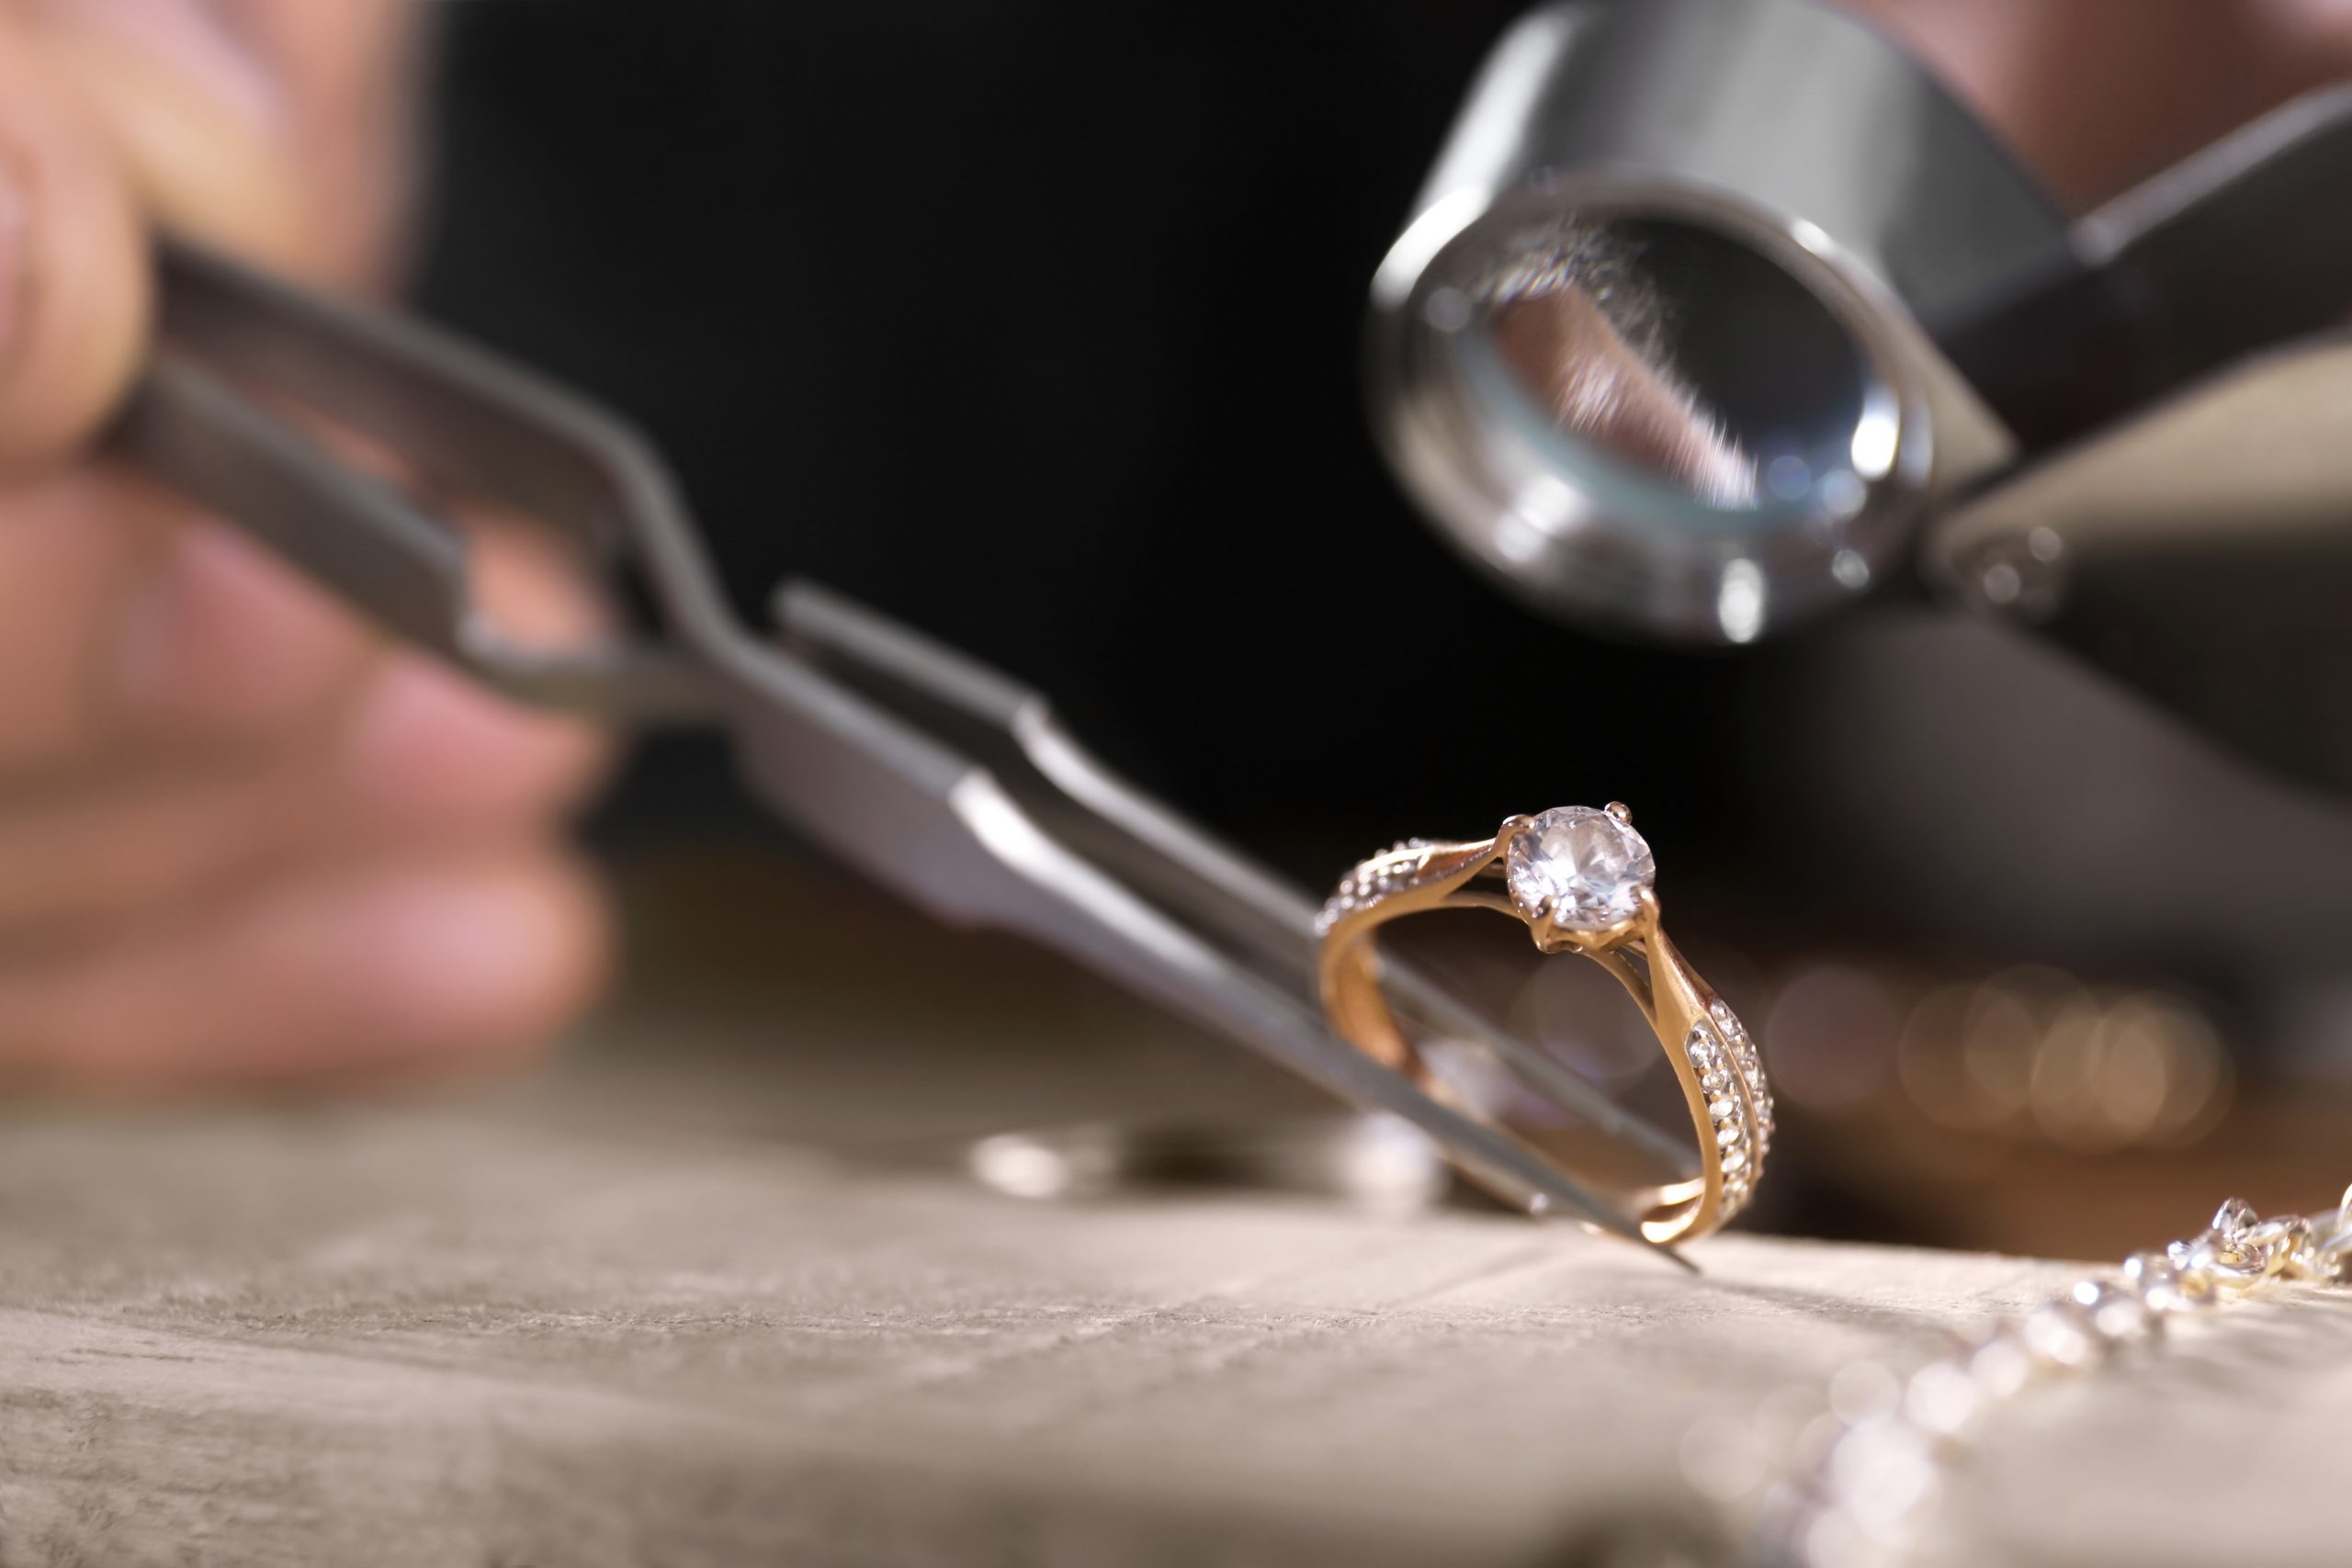 How Much Is a Jewelry Appraisal?